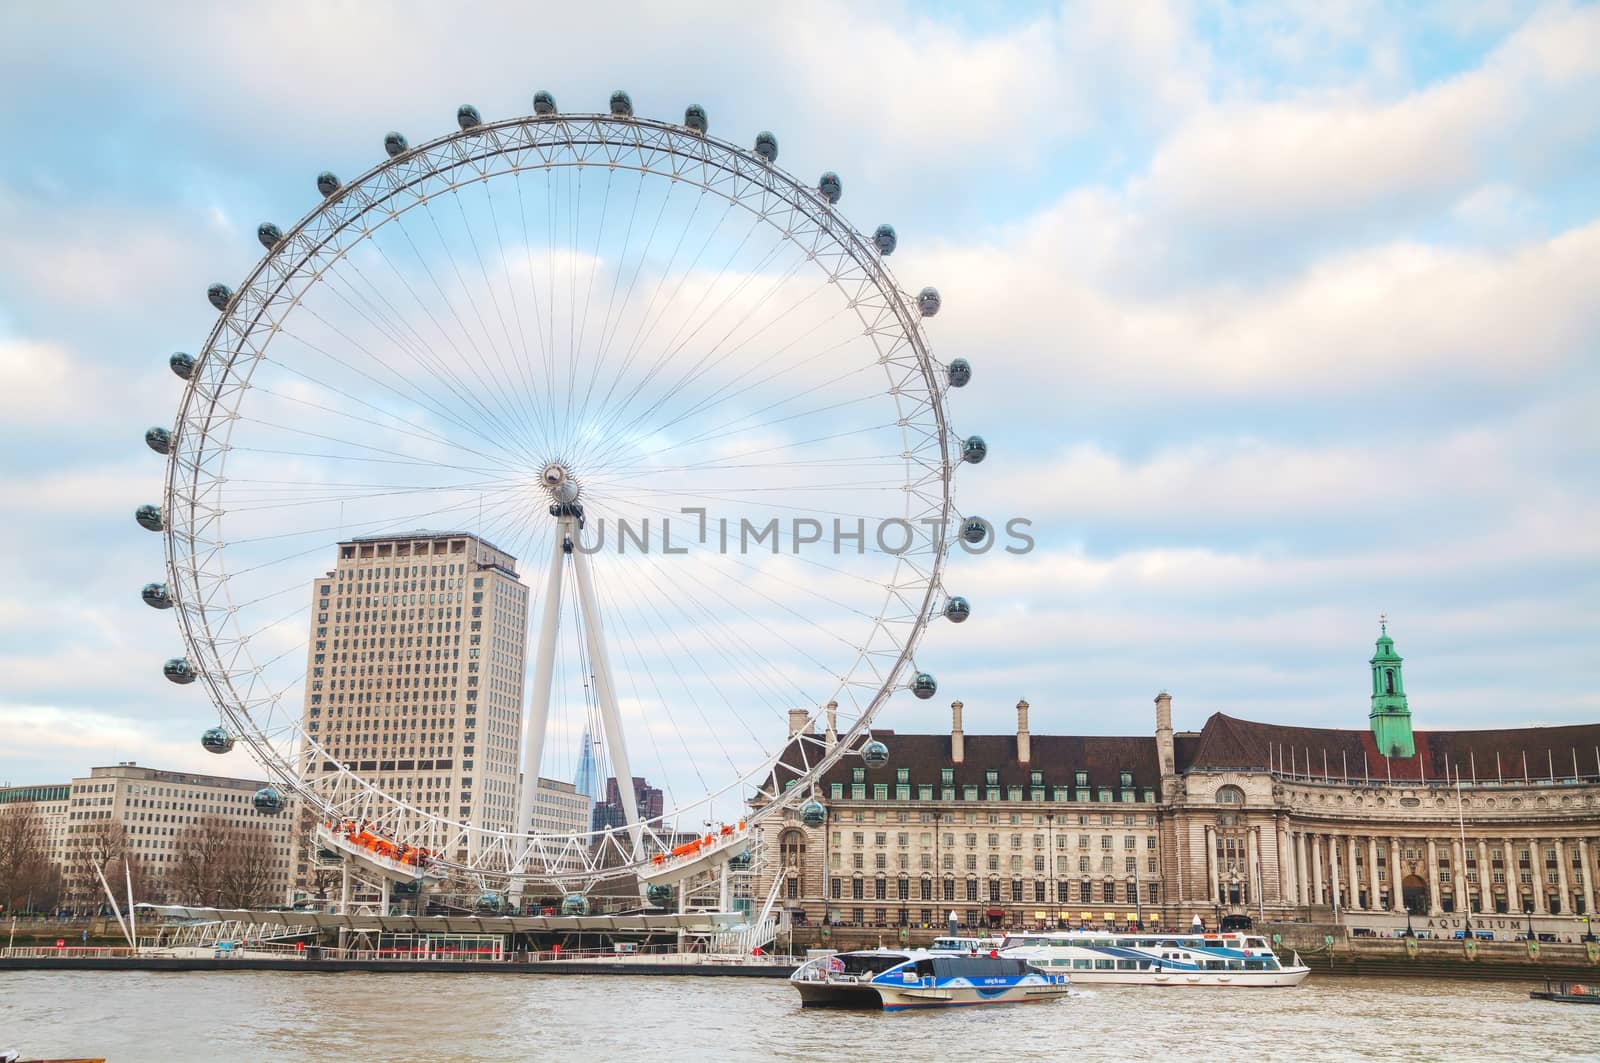 LONDON - APRIL 5: The London Eye Ferris wheel on April 5, 2015 in London, UK. The entire structure is 135 metres tall and the wheel has a diameter of 120 metres.